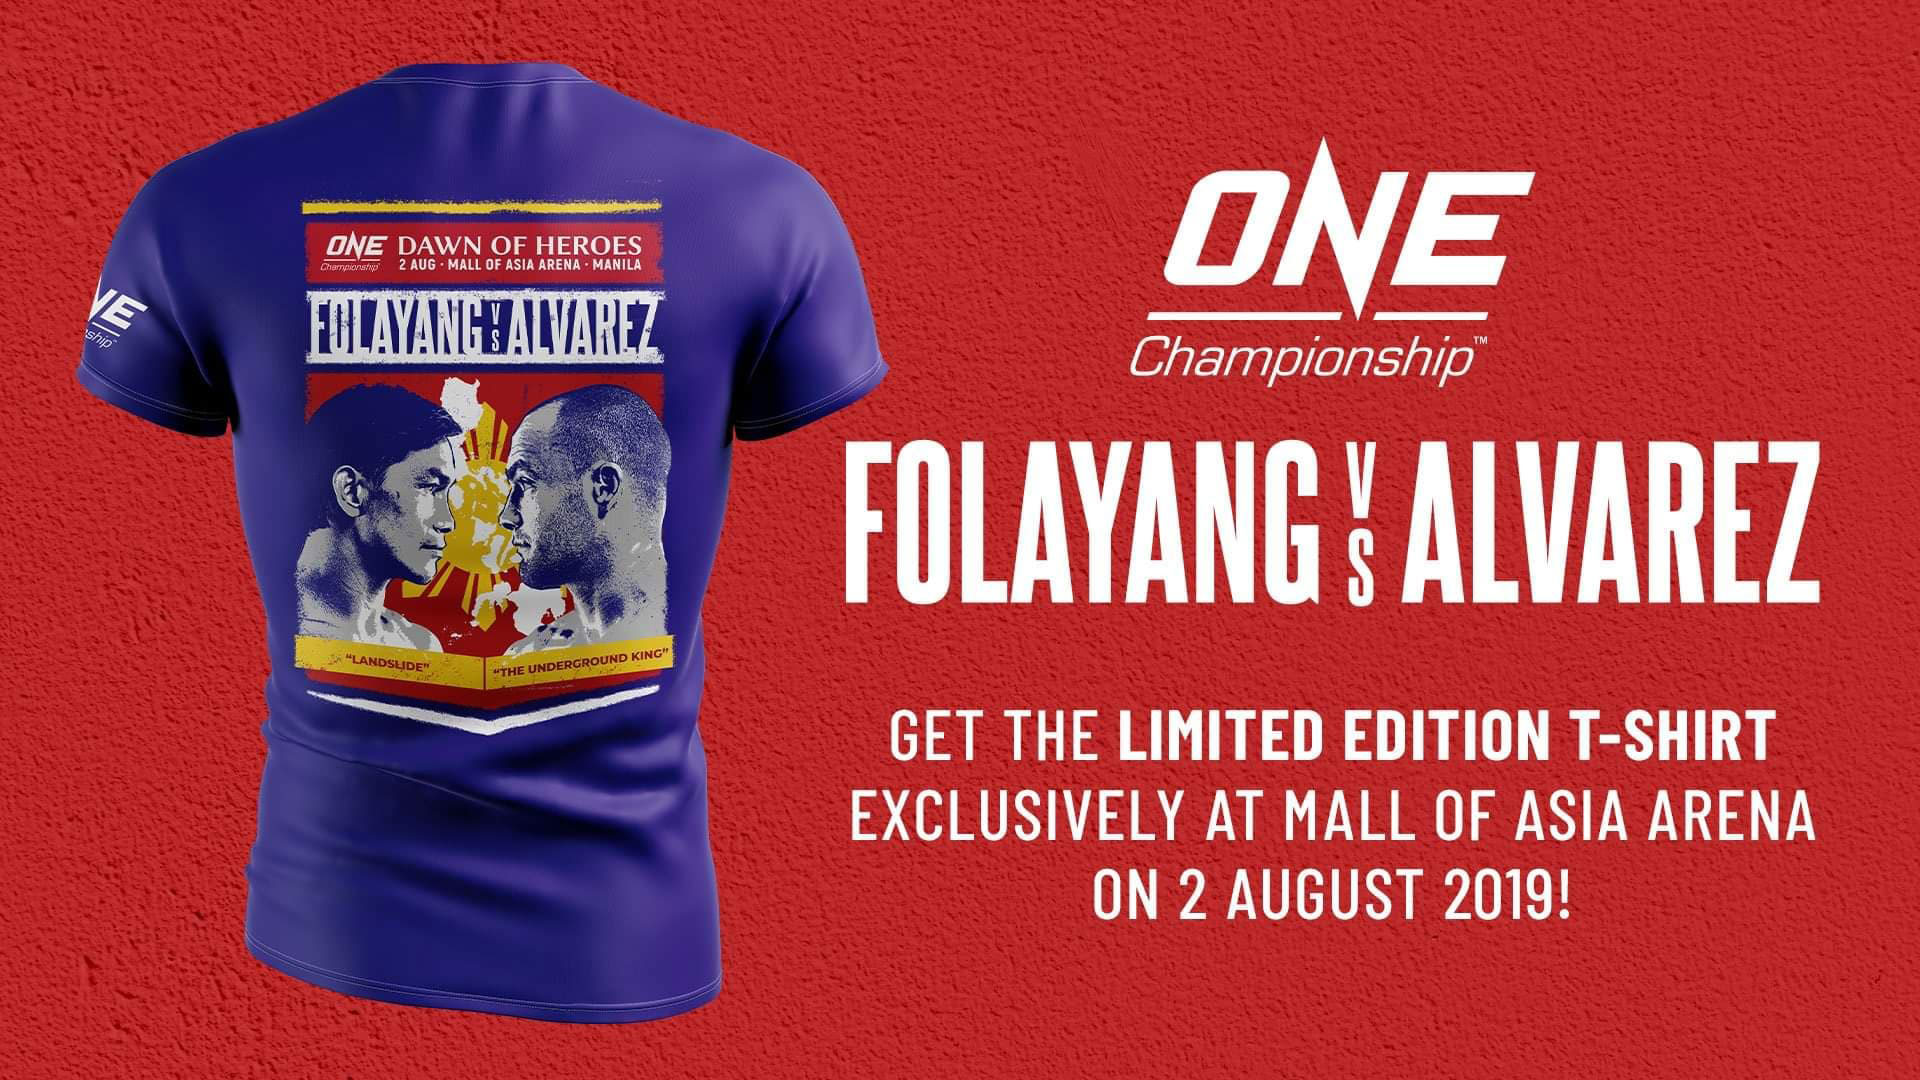 one-ad-for-eduard-folayang-vs-eddie-alvarez Eddie Alvarez says experience over Folayang will lead him to victory Mixed Martial Arts News ONE Championship  - philippine sports news